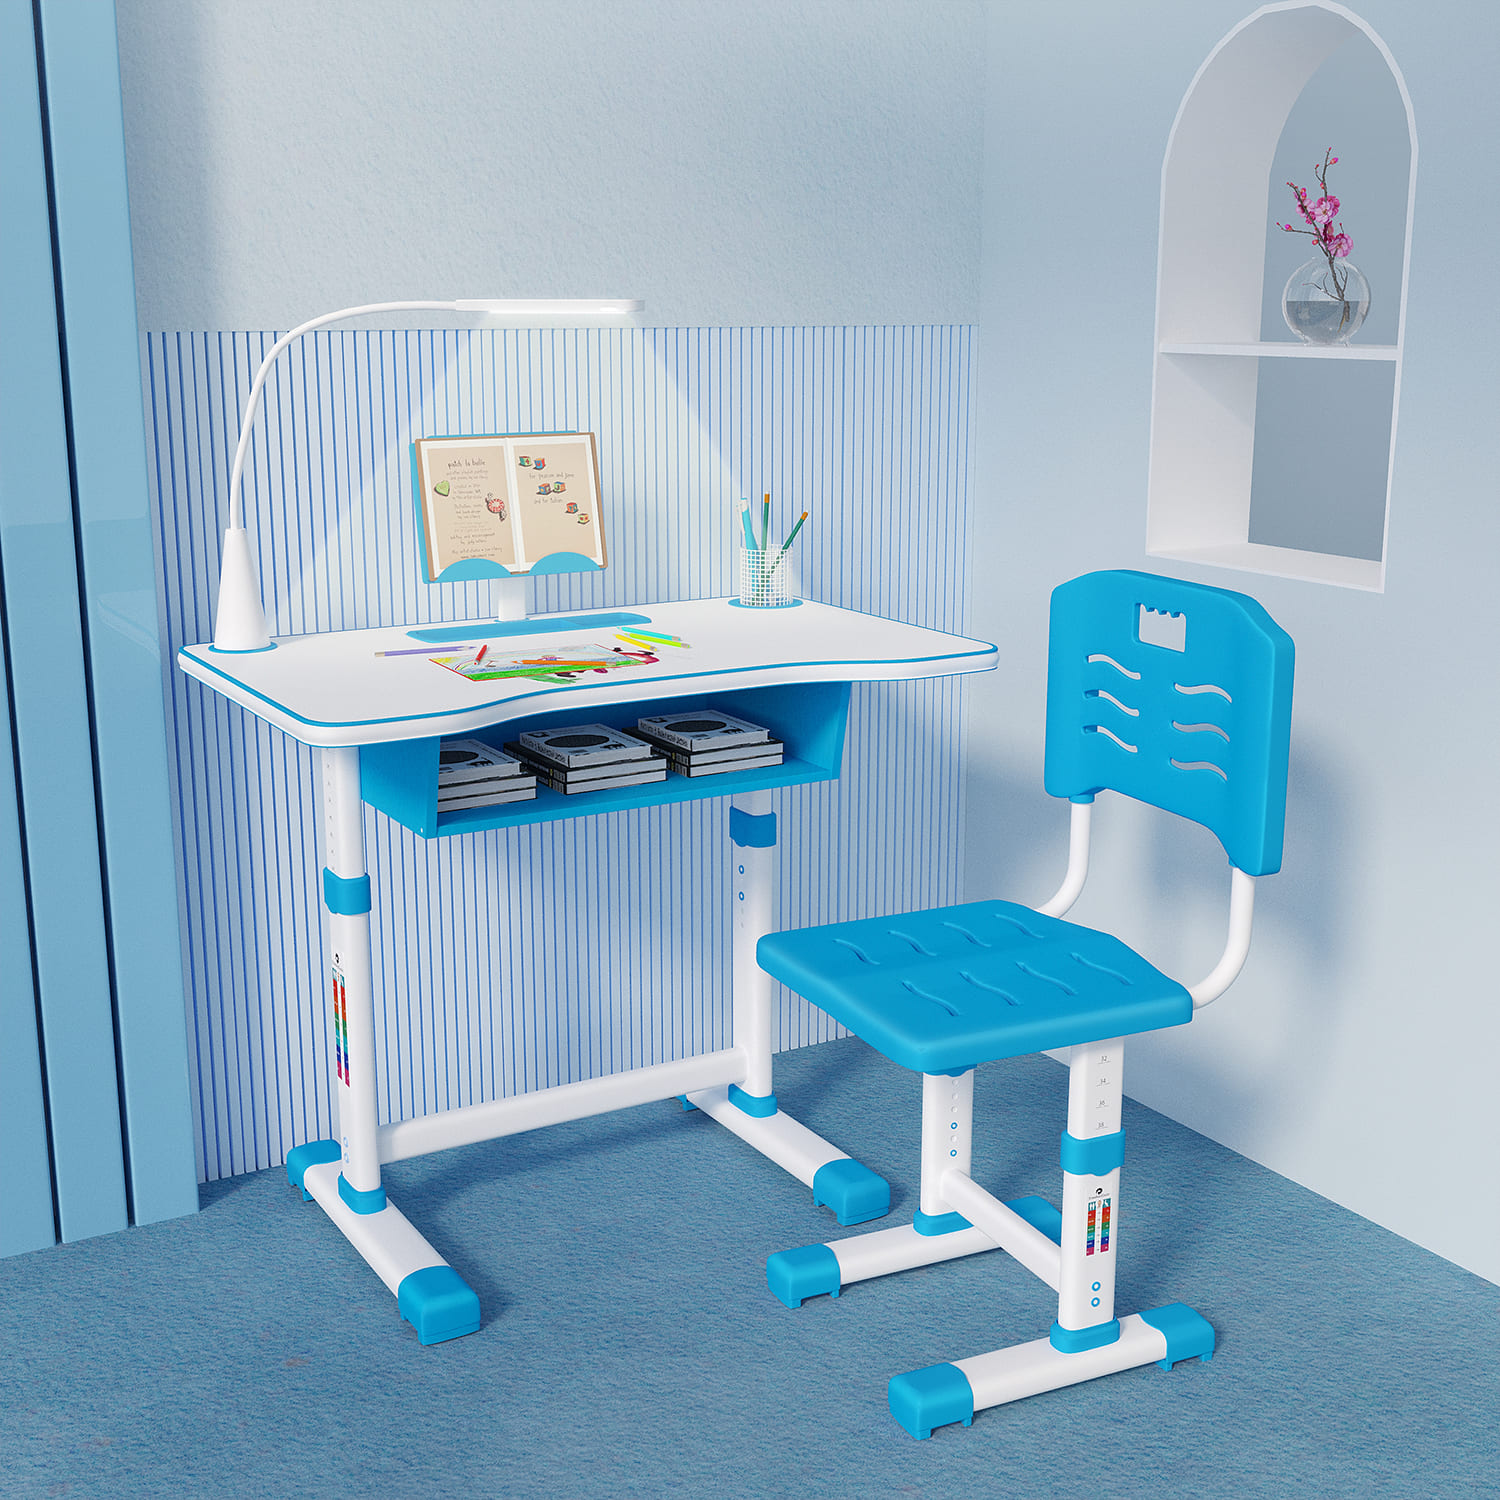 A80 Adjustable Height, Multi-Functional Kids Study Table with Book Holder, Drawer, Extra Large tiltable Desktop with an Option of LED Light (Blue)